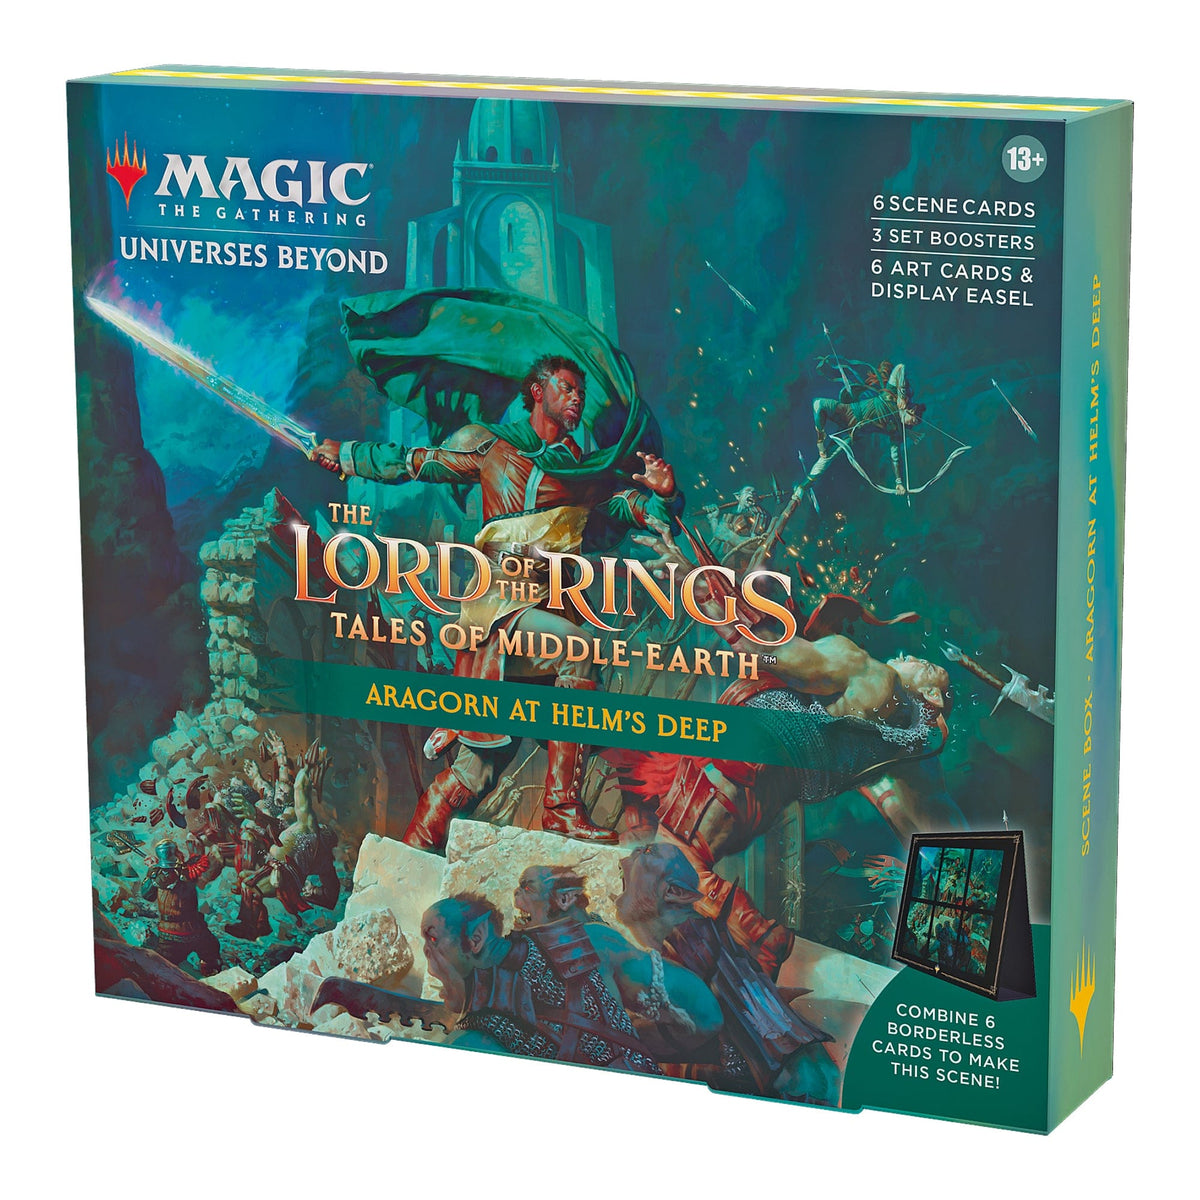 Magic the Gathering CCG: The Lord of the Rings - Tales of Middle-earth Scene Box - Aragorn at Helm's Deep